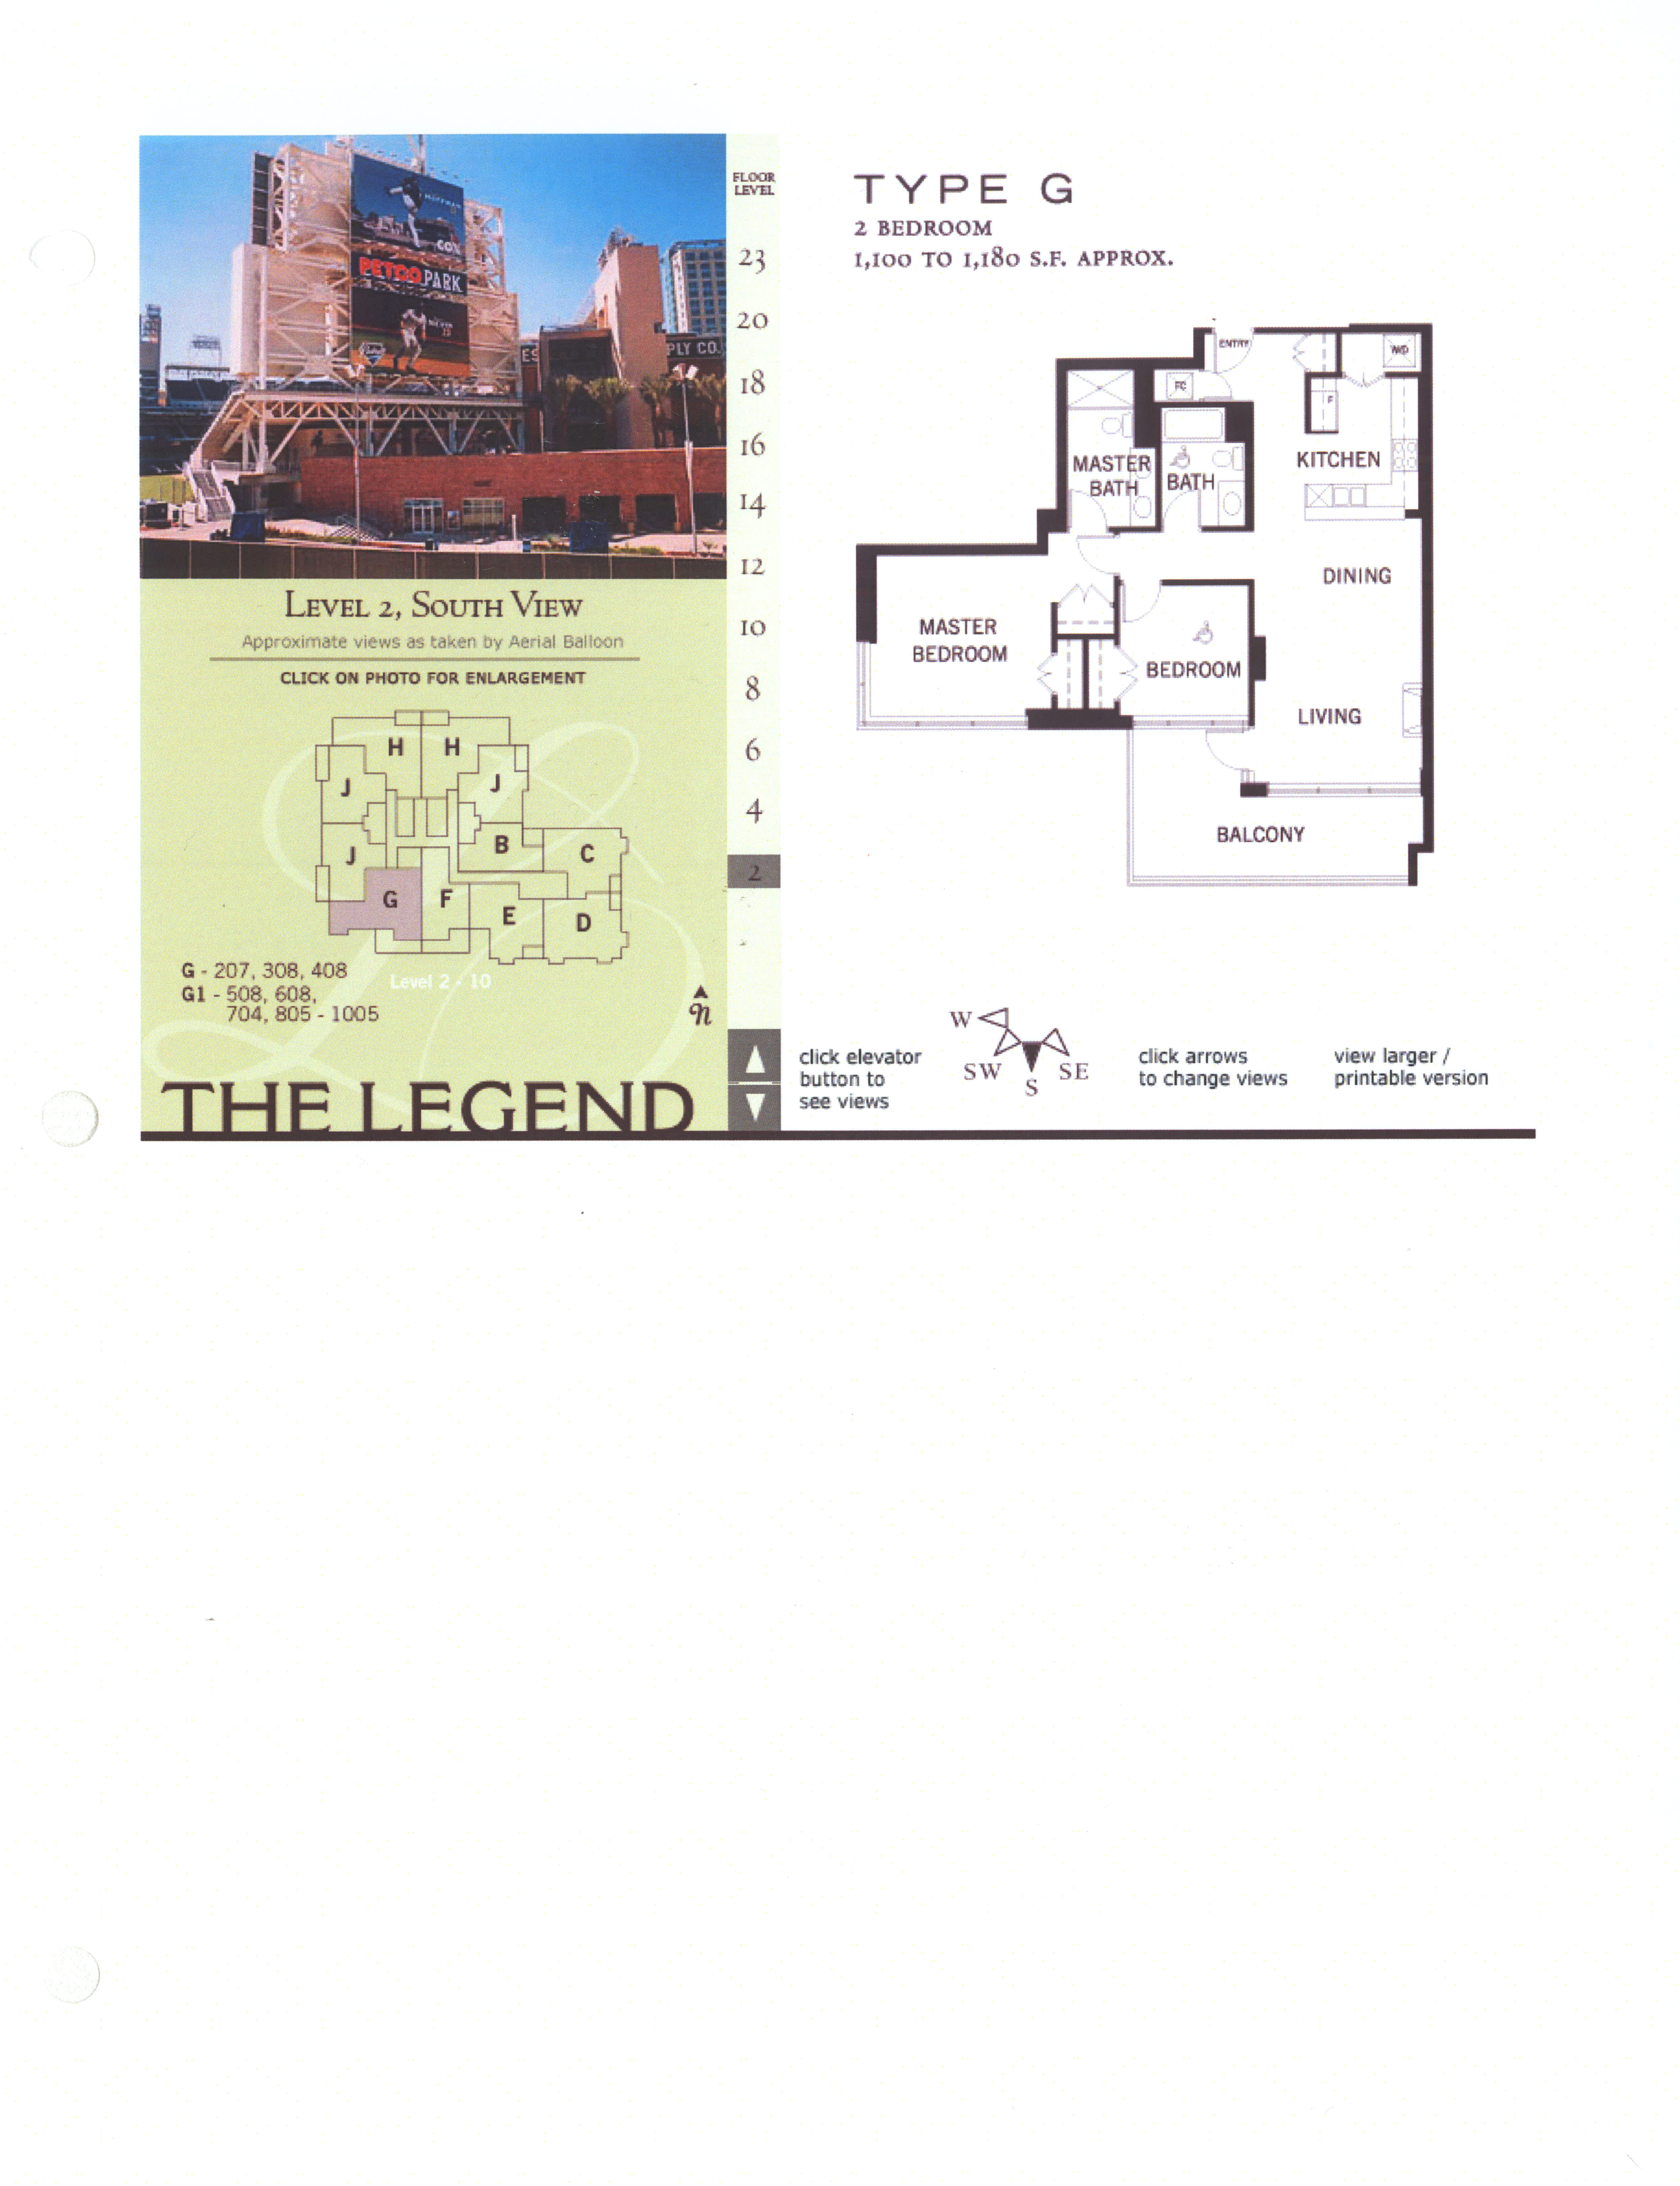 The Legend Floor Plan Level 2, South View – Type G